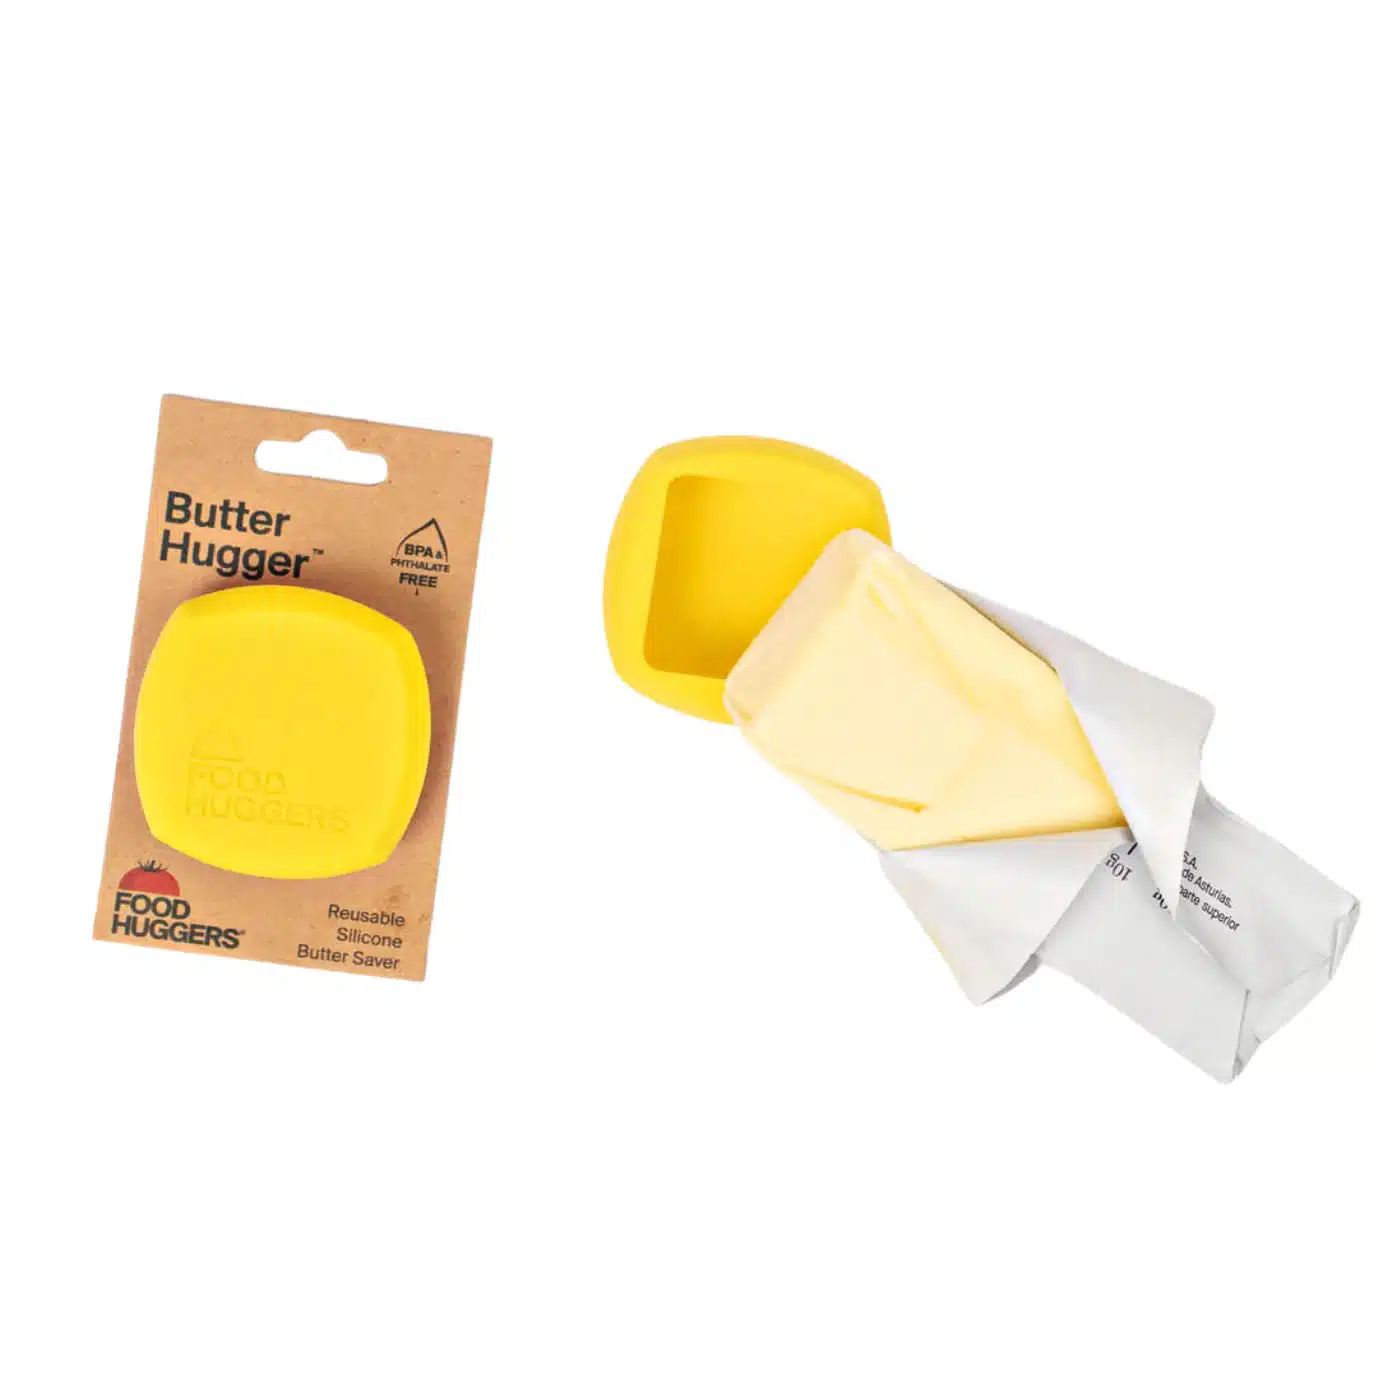 Food Huggers Butter Huggers - Reusable Silicone Food Covers for Butter from Gimme the Good Stuff